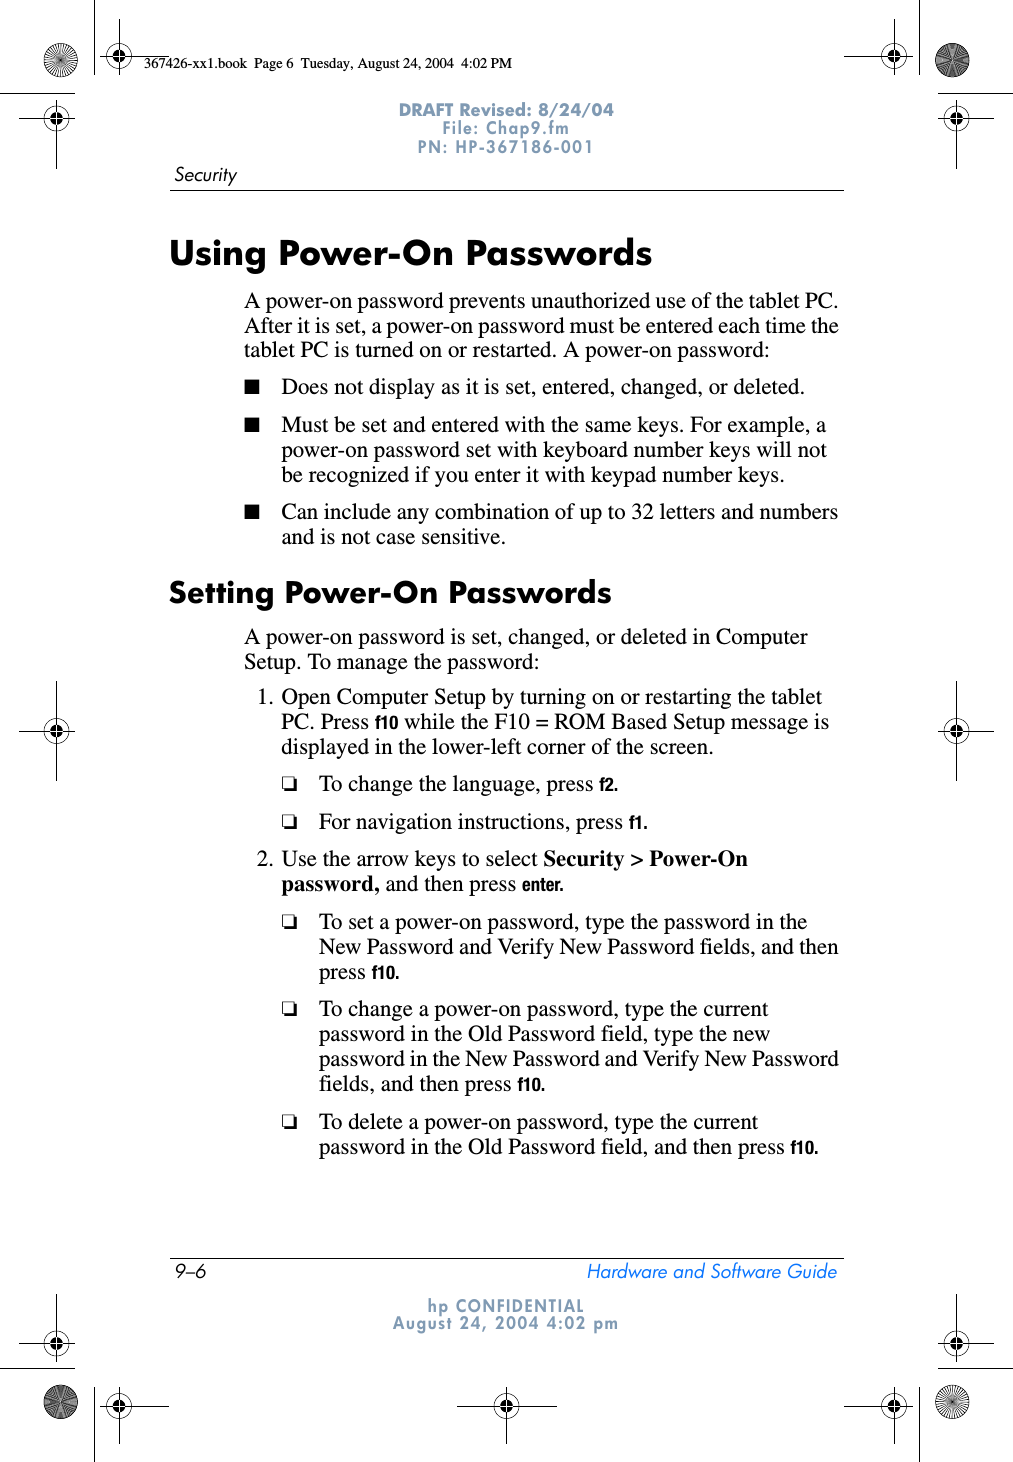 9–6 Hardware and Software GuideSecurityDRAFT Revised: 8/24/04File: Chap9.fm PN: HP-367186-001 hp CONFIDENTIALAugust 24, 2004 4:02 pmUsing Power-On PasswordsA power-on password prevents unauthorized use of the tablet PC. After it is set, a power-on password must be entered each time the tablet PC is turned on or restarted. A power-on password:■Does not display as it is set, entered, changed, or deleted.■Must be set and entered with the same keys. For example, a power-on password set with keyboard number keys will not be recognized if you enter it with keypad number keys.■Can include any combination of up to 32 letters and numbers and is not case sensitive.Setting Power-On PasswordsA power-on password is set, changed, or deleted in Computer Setup. To manage the password:1. Open Computer Setup by turning on or restarting the tablet PC. Press f10 while the F10 = ROM Based Setup message is displayed in the lower-left corner of the screen.❏To change the language, press f2.❏For navigation instructions, press f1.2. Use the arrow keys to select Security &gt; Power-On password, and then press enter.❏To set a power-on password, type the password in the New Password and Verify New Password fields, and then press f10.❏To change a power-on password, type the current password in the Old Password field, type the new password in the New Password and Verify New Password fields, and then press f10.❏To delete a power-on password, type the current password in the Old Password field, and then press f10.367426-xx1.book  Page 6  Tuesday, August 24, 2004  4:02 PM